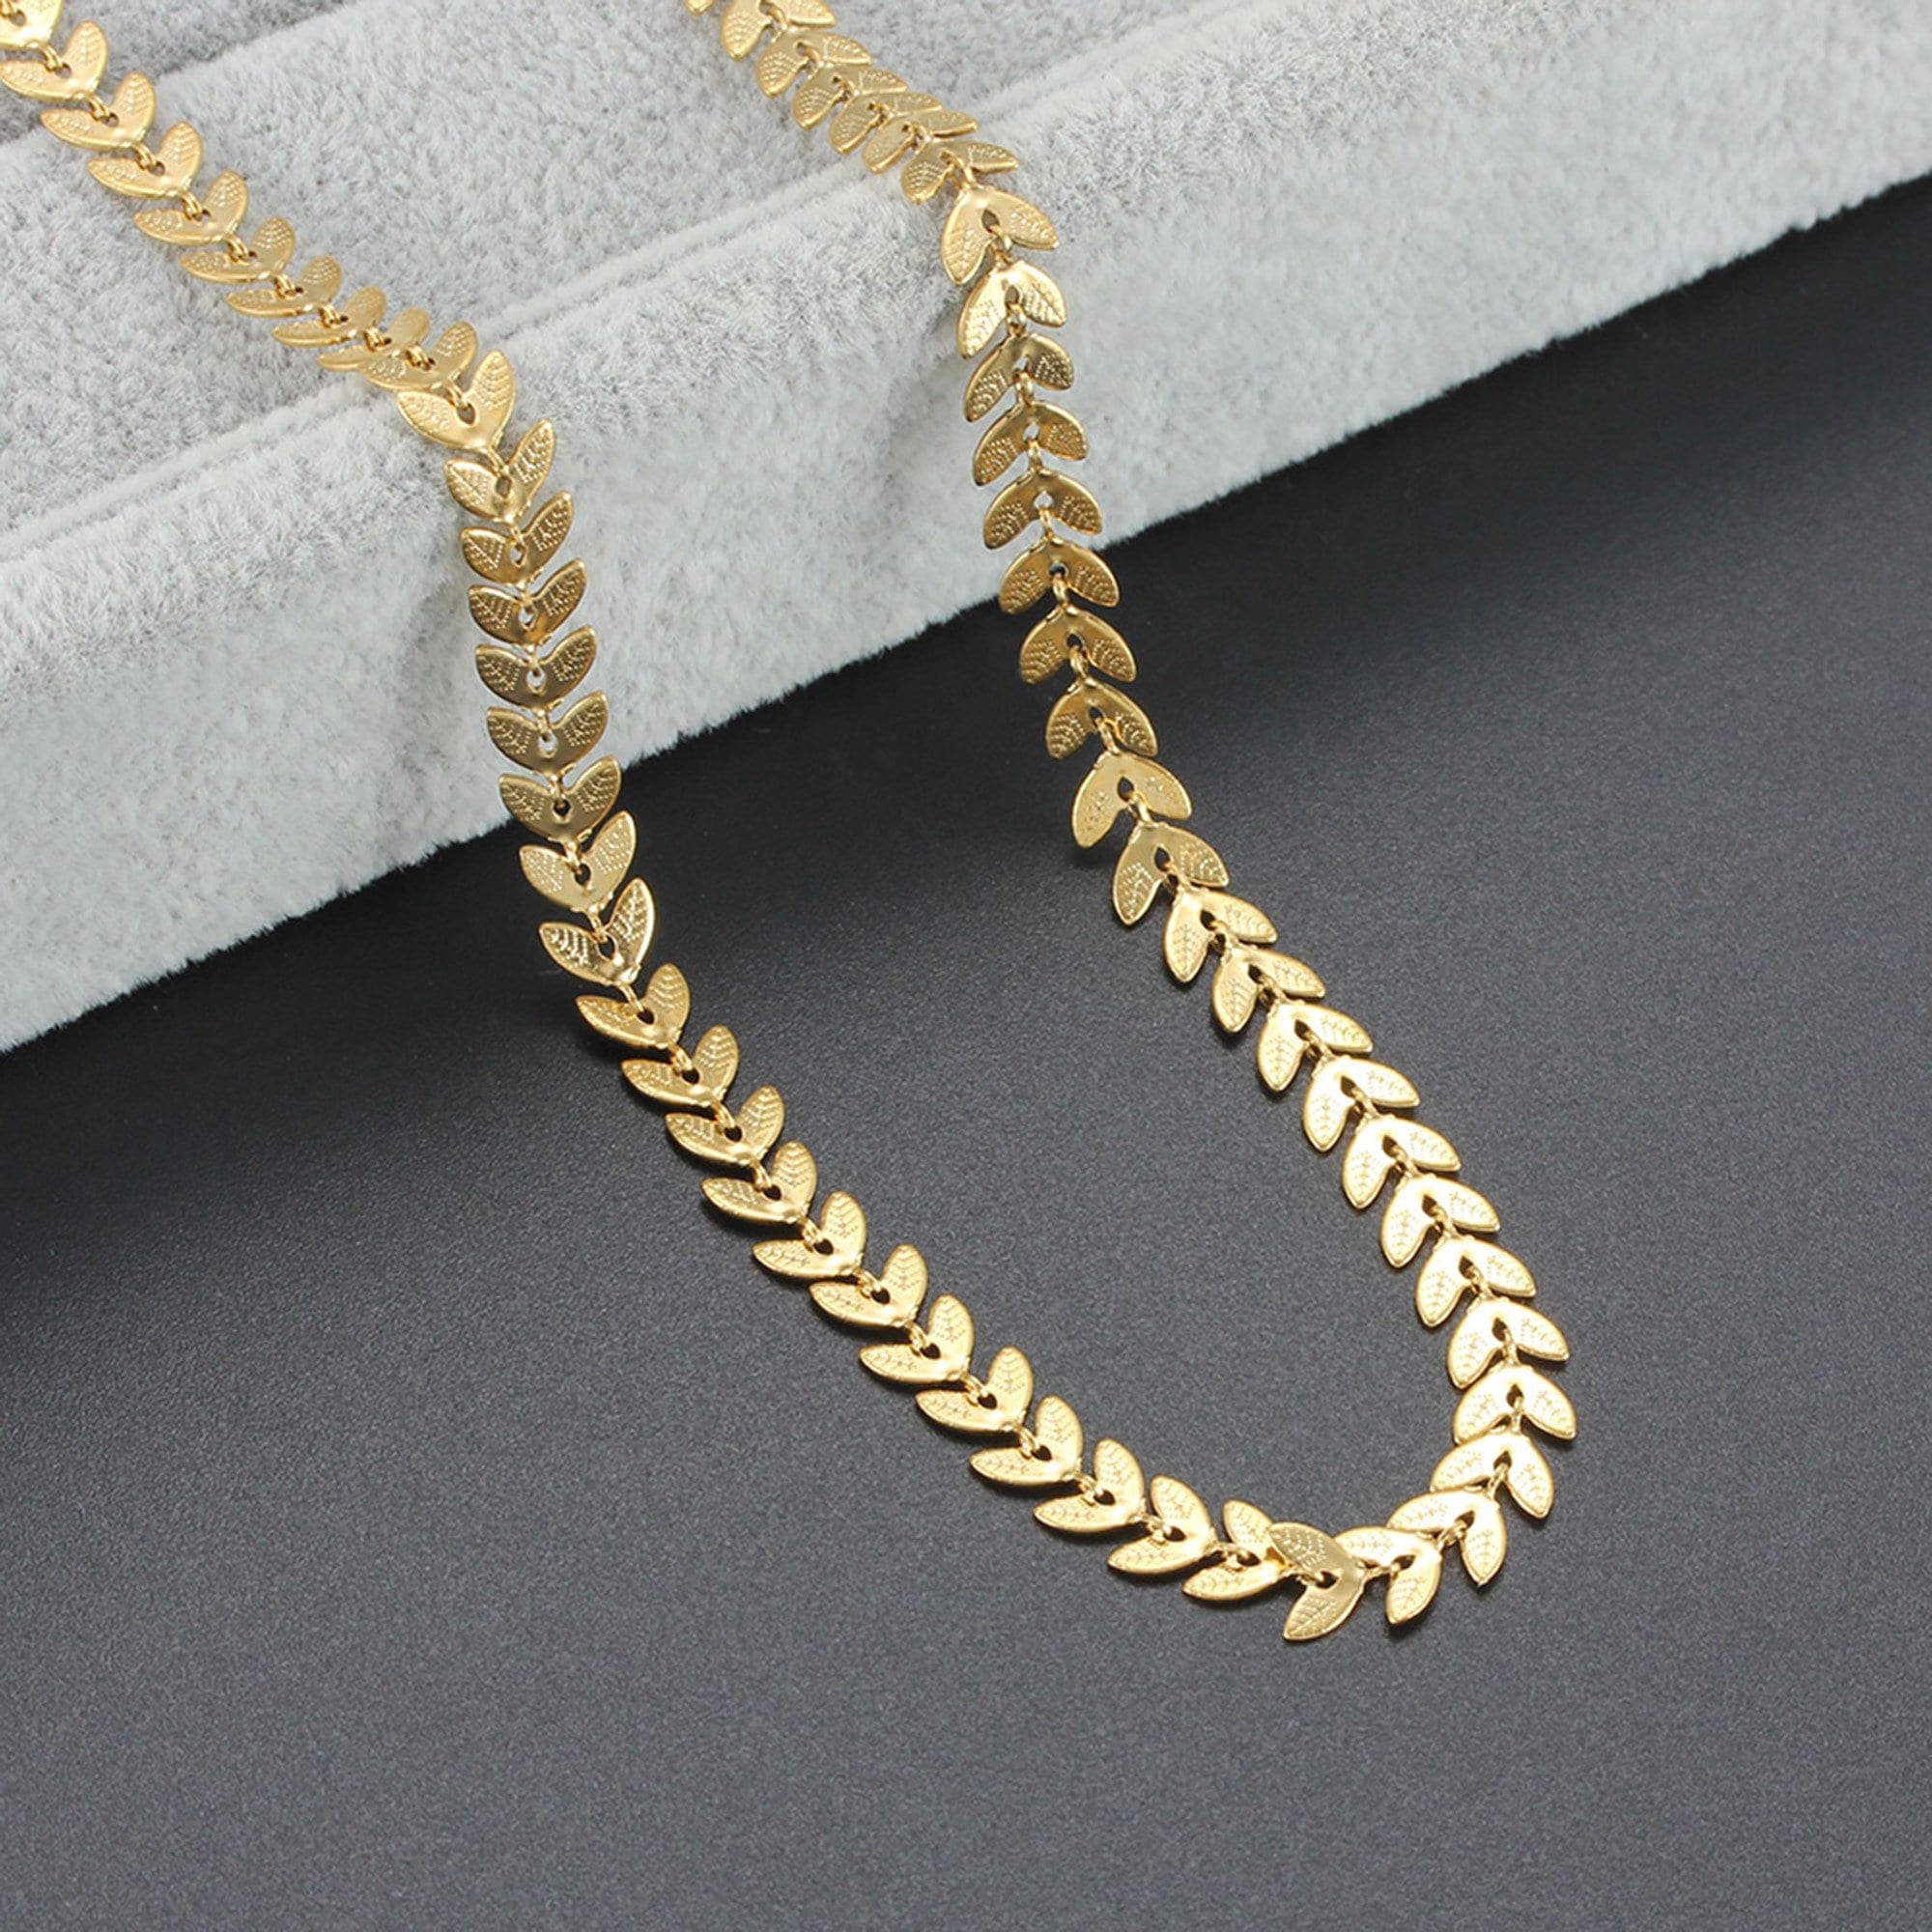 Gold Stainless Steel Box Chain Necklace, Military Dog Tag Chain, Chains for  Jewelry Making, Ready to Wear 